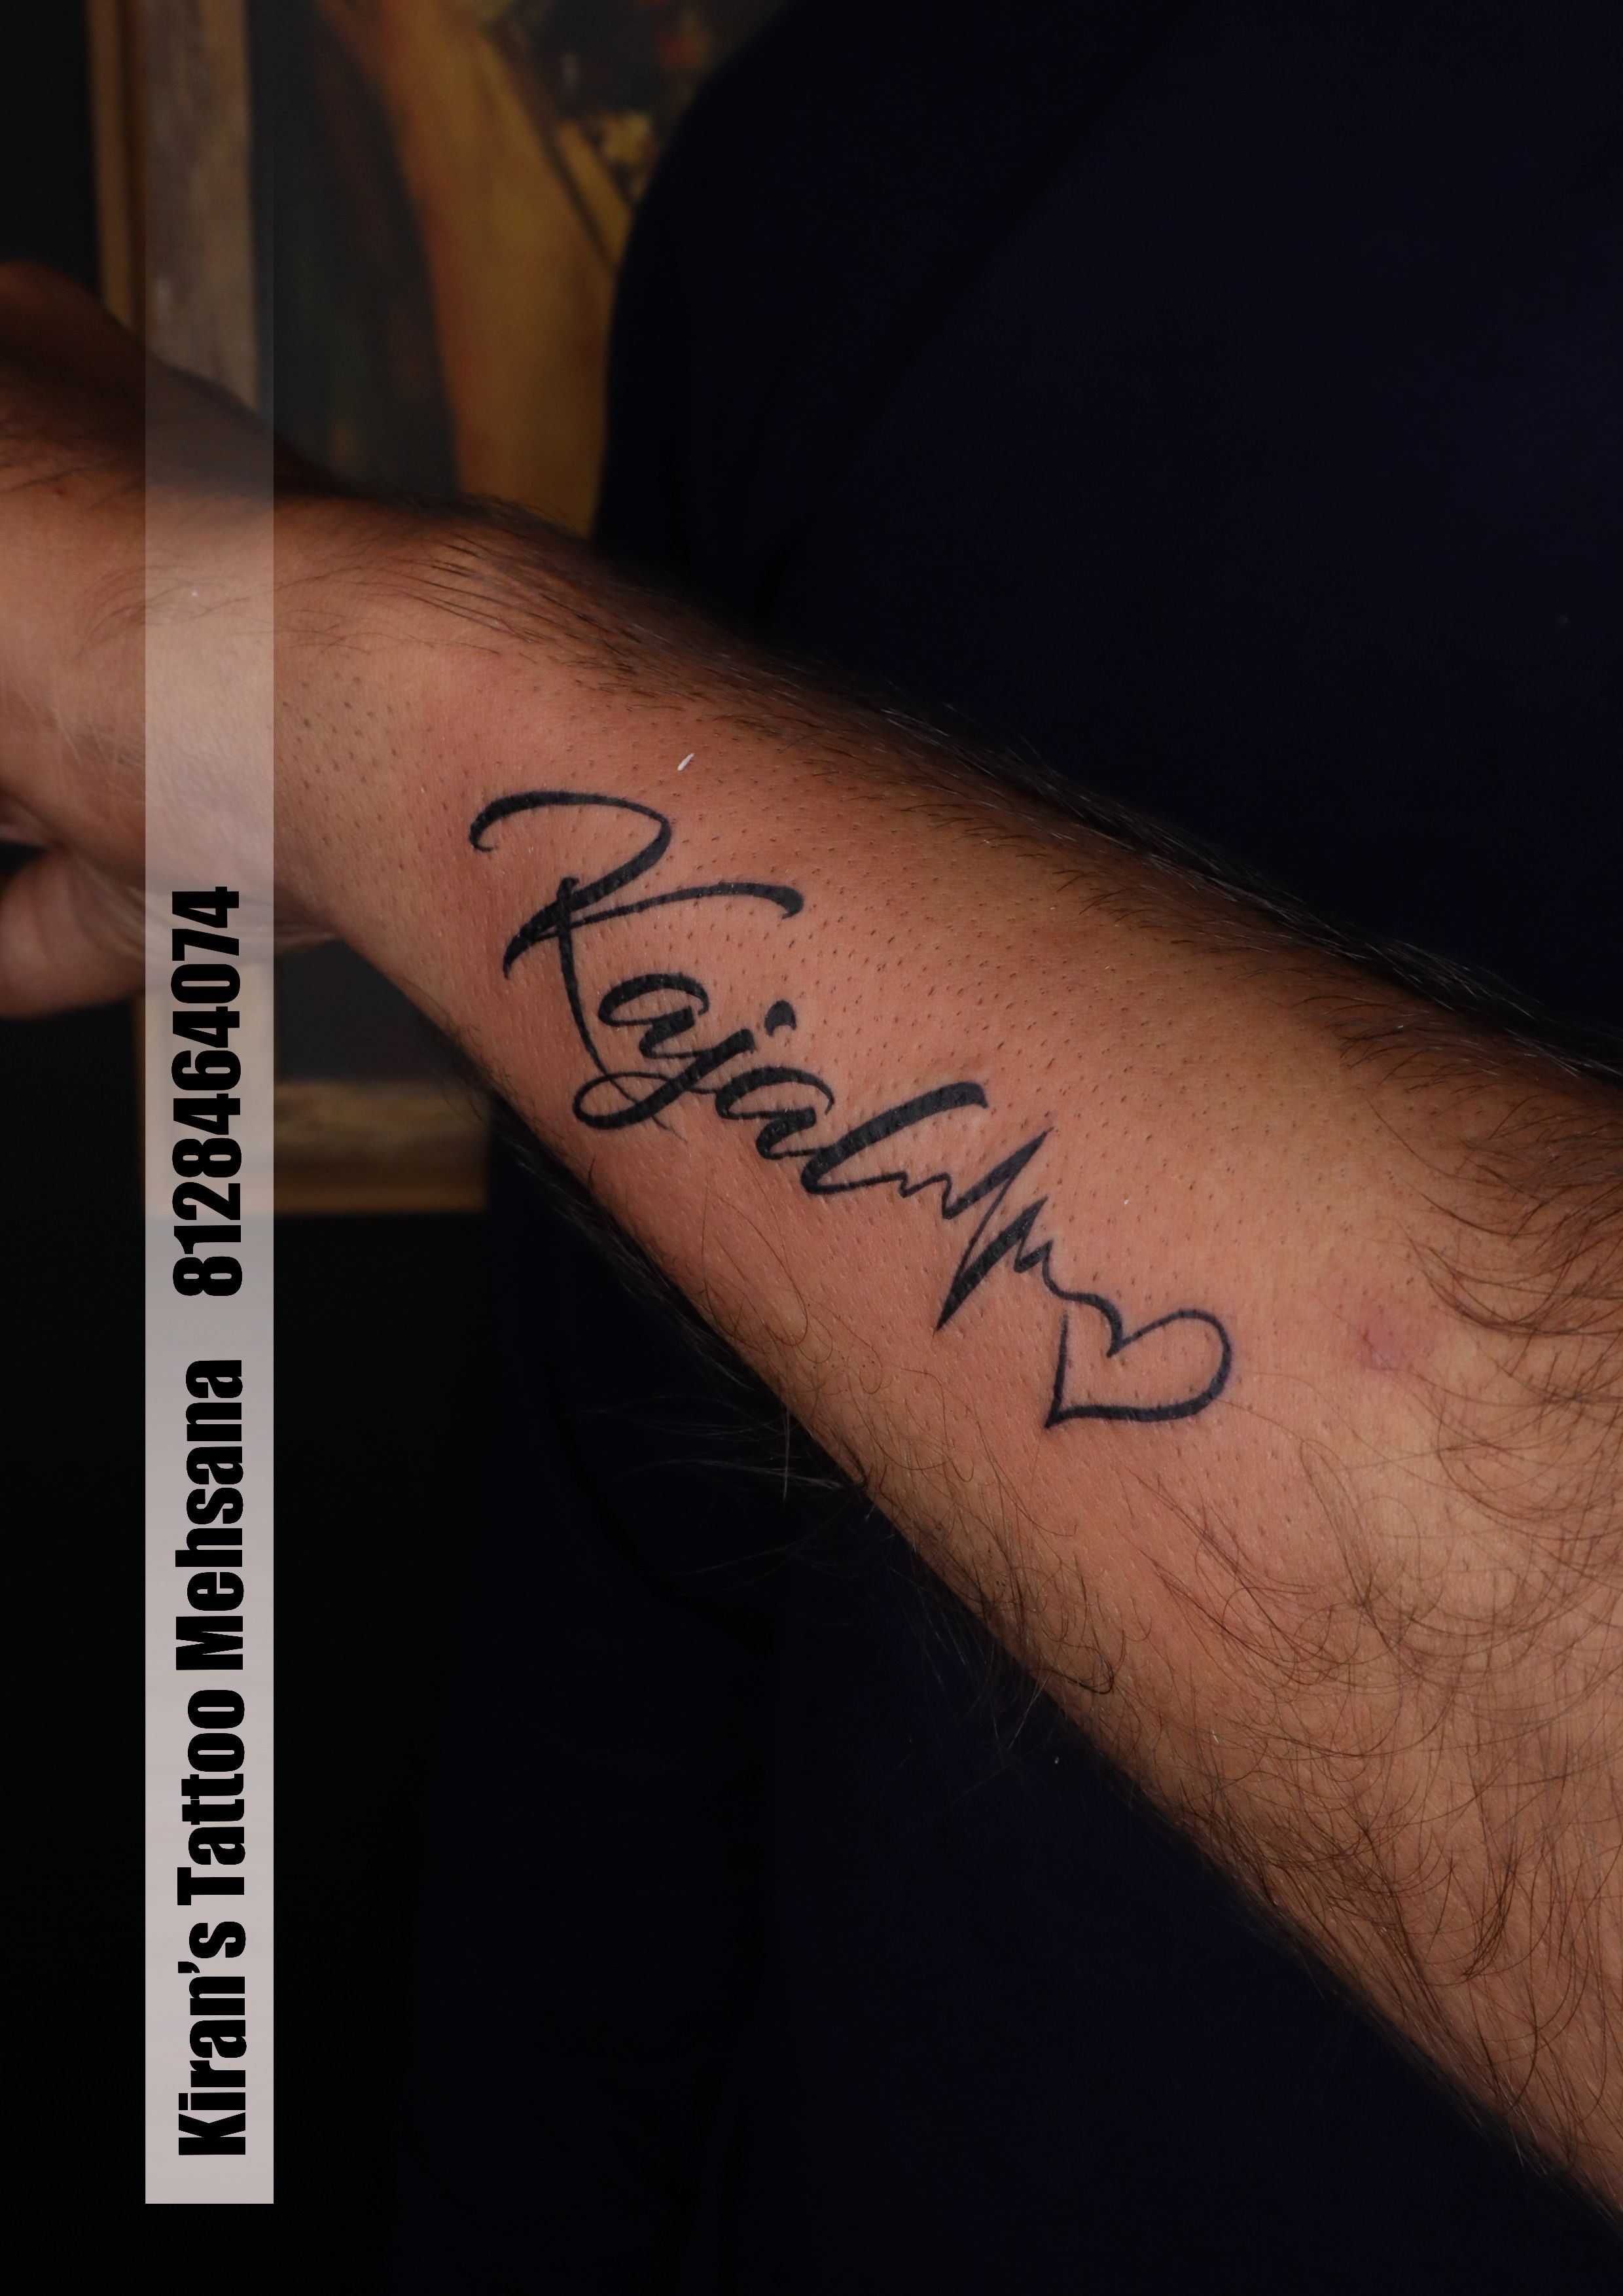 Kamron Name Tattoo Designs - Page 4 of 5 - Tattoos with Names